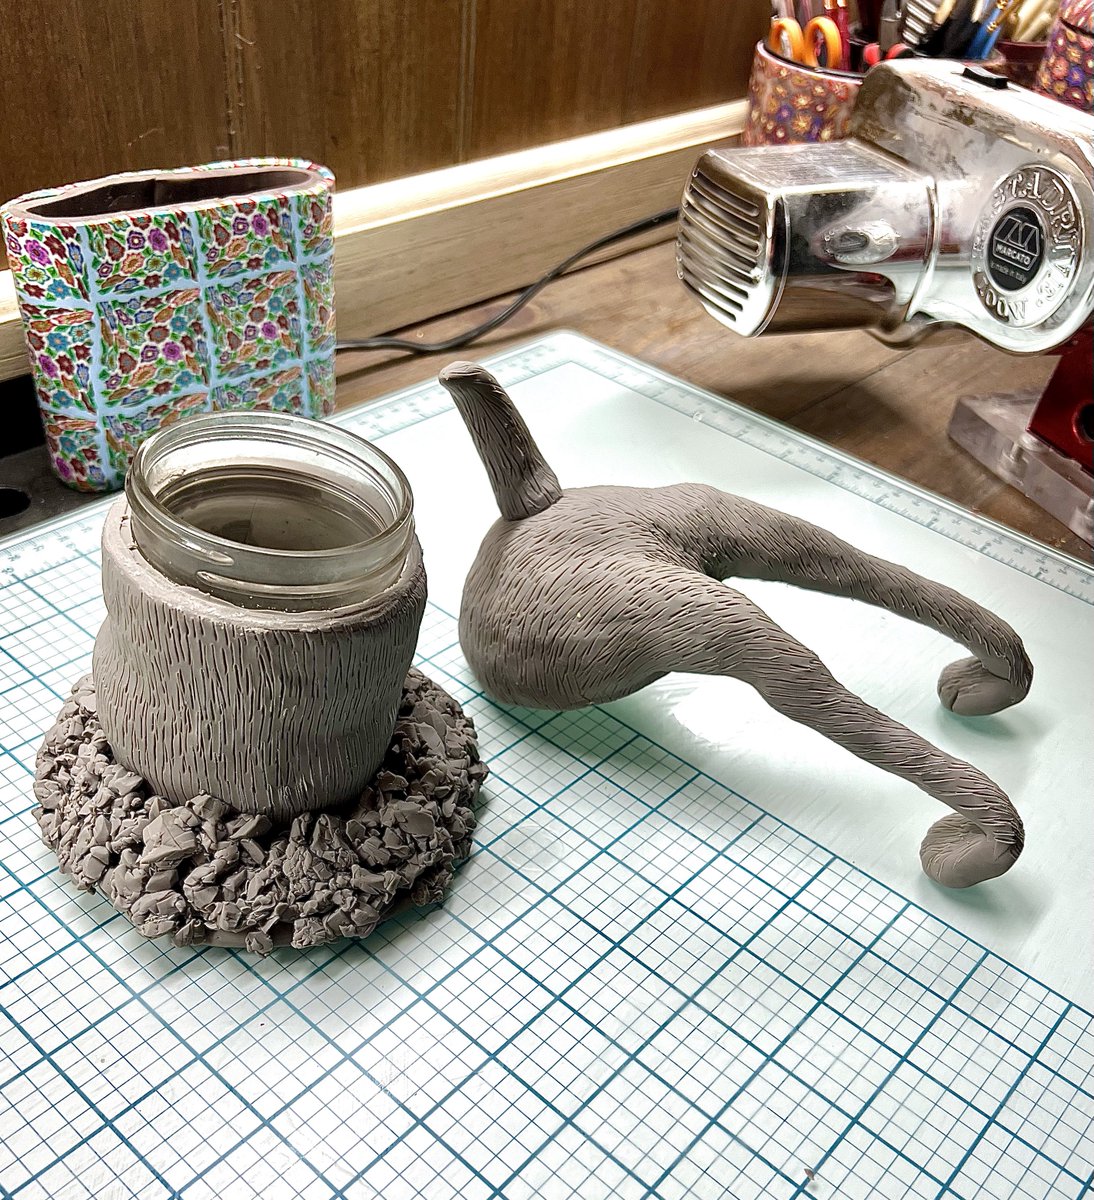 We helped momma in her studio today & this is what we came up with!🤓😅😂 It’s a digging doggy stash jar for goodies or treatos. 🥳 This will be donated to Lola Patolla for her auction this summer. Now, onto painting it!🥳🥰🐾😘 #dogsoftwitter #DogsofX #TurboTugandTink